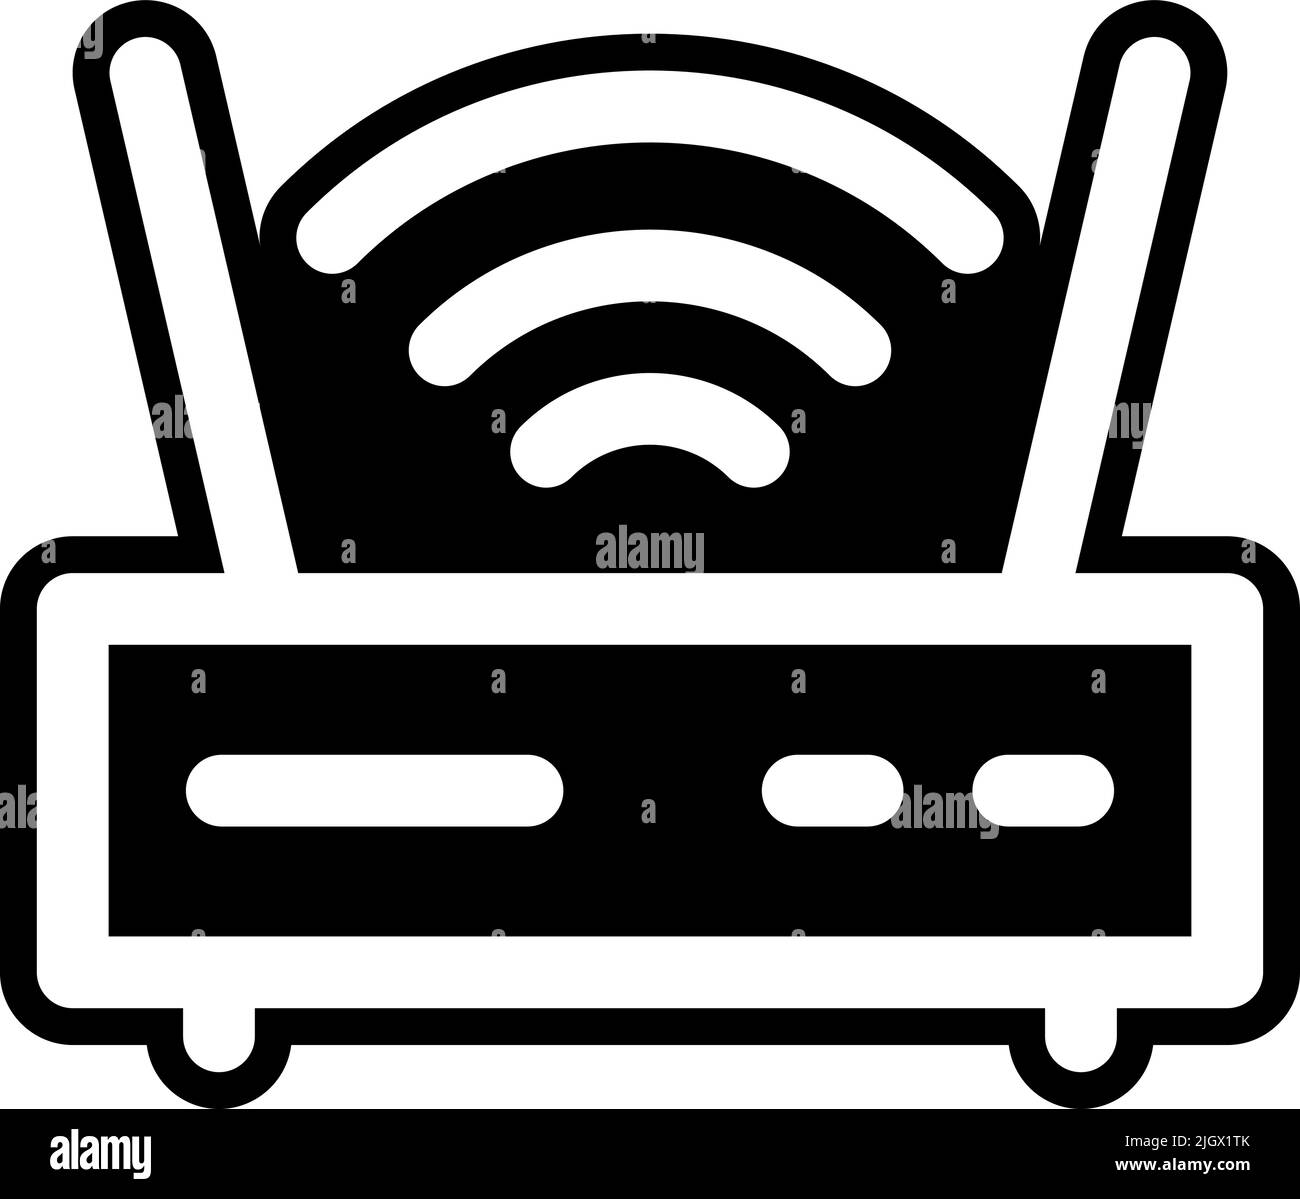 Communication and media wifi router icon . Stock Vector